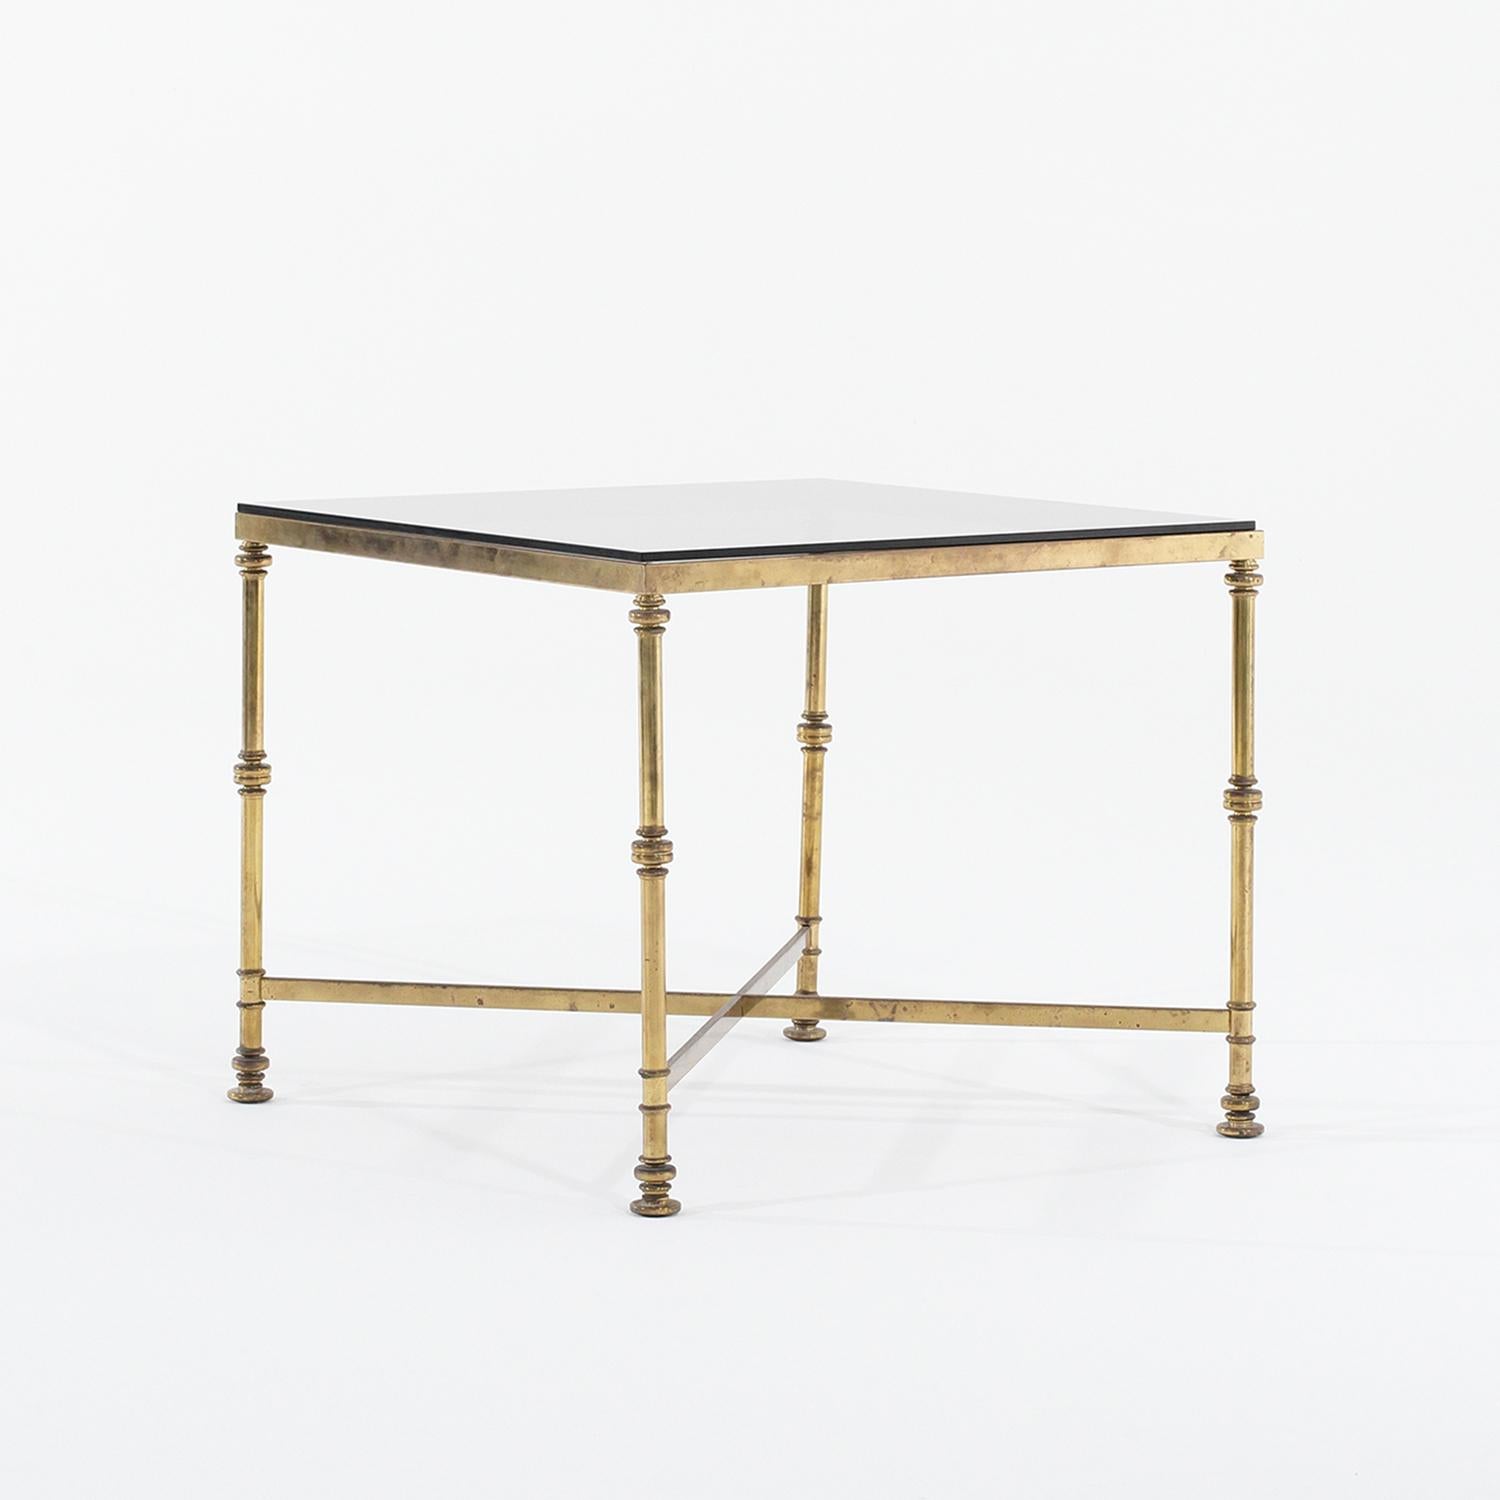 Hand-Crafted 20th Century French Vintage Brass Side, Sofa Table in the Style of Maison Jansen For Sale